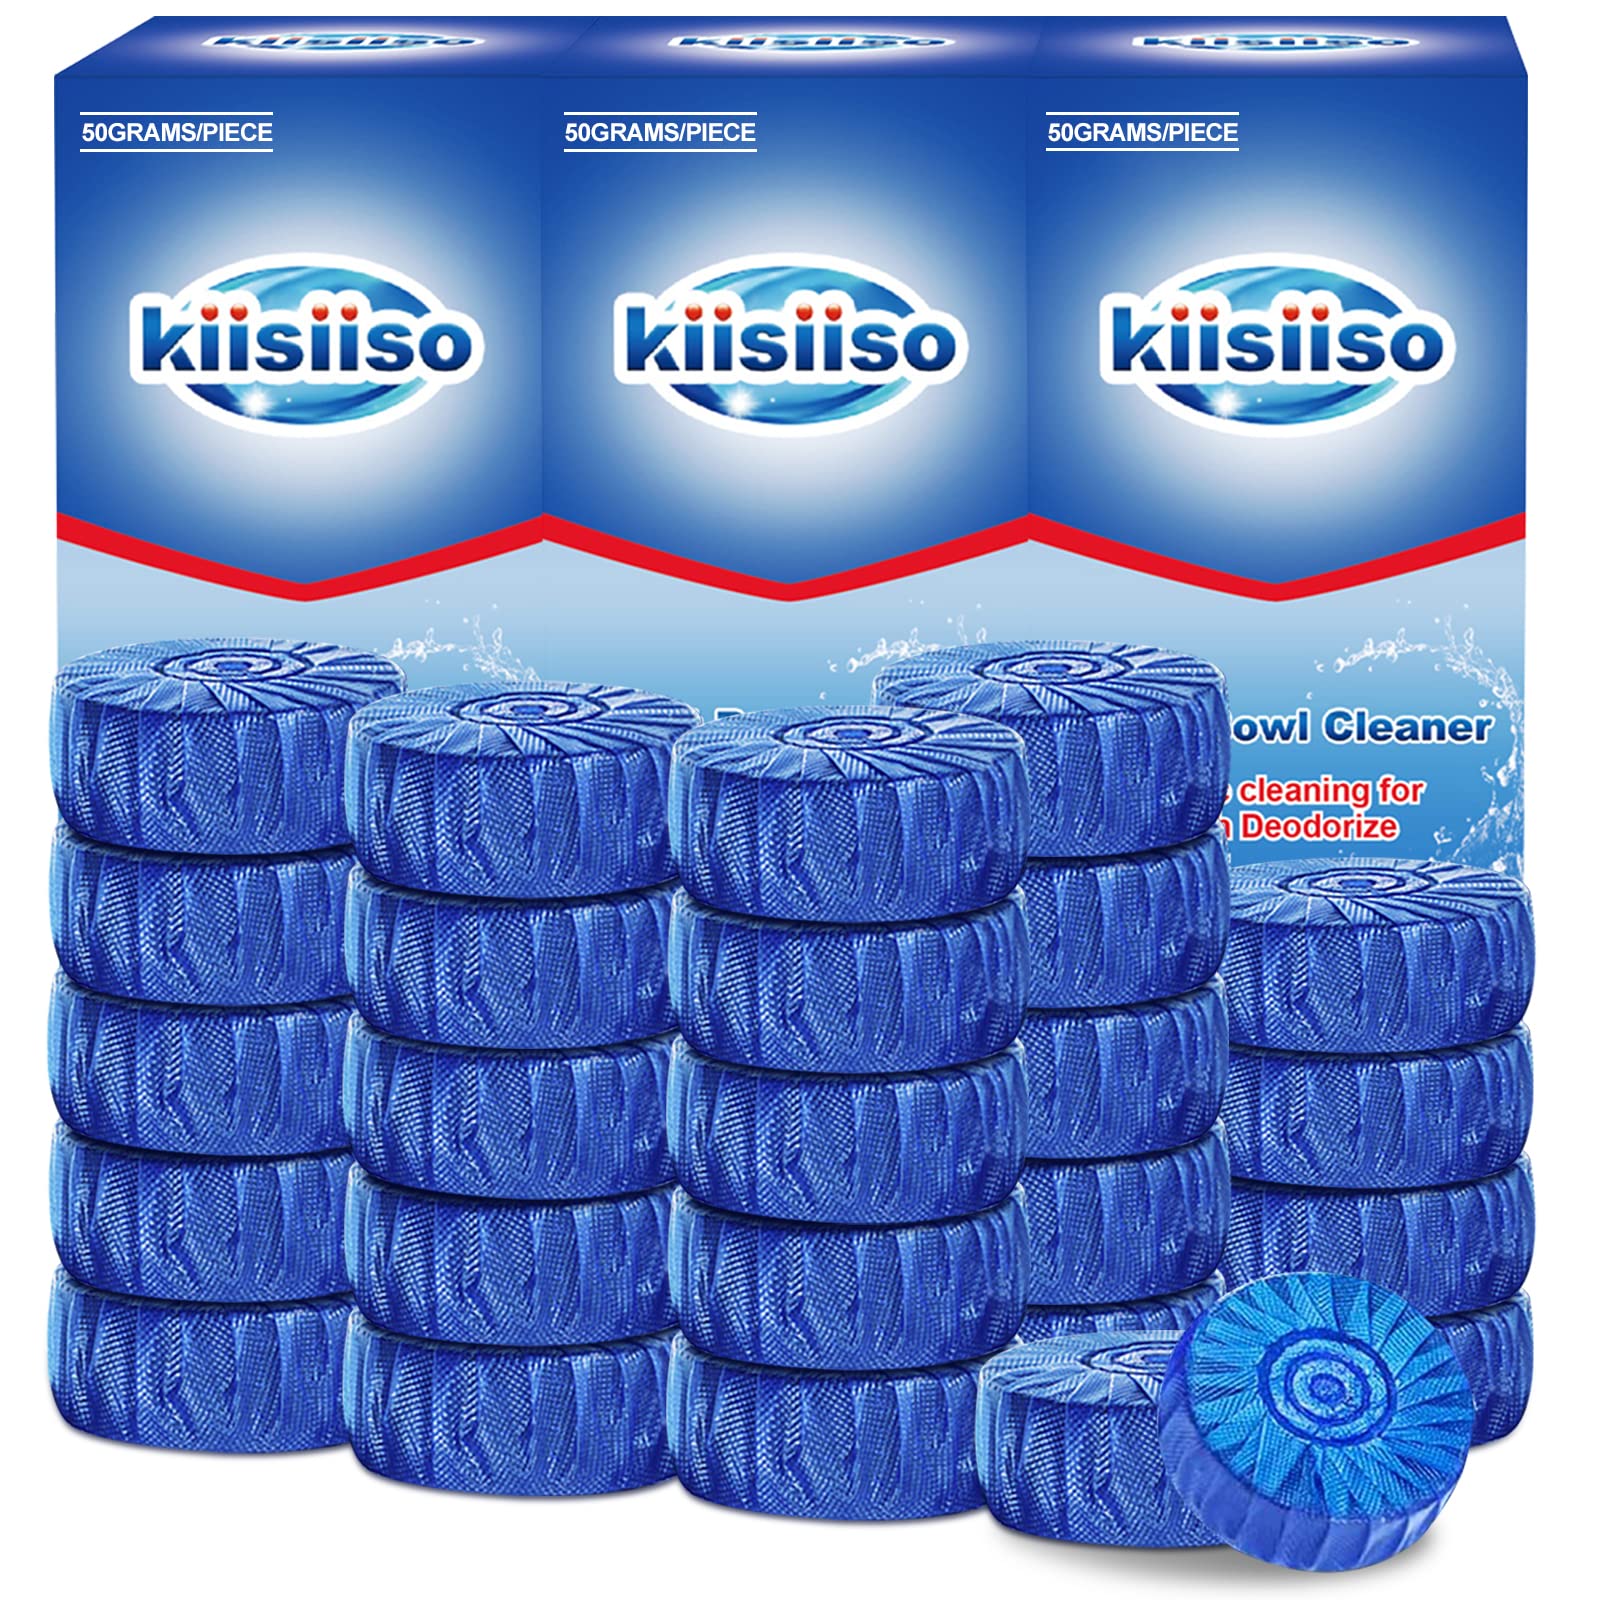 KIISIISO Automatic Toilet Bowl Cleaner Tablets